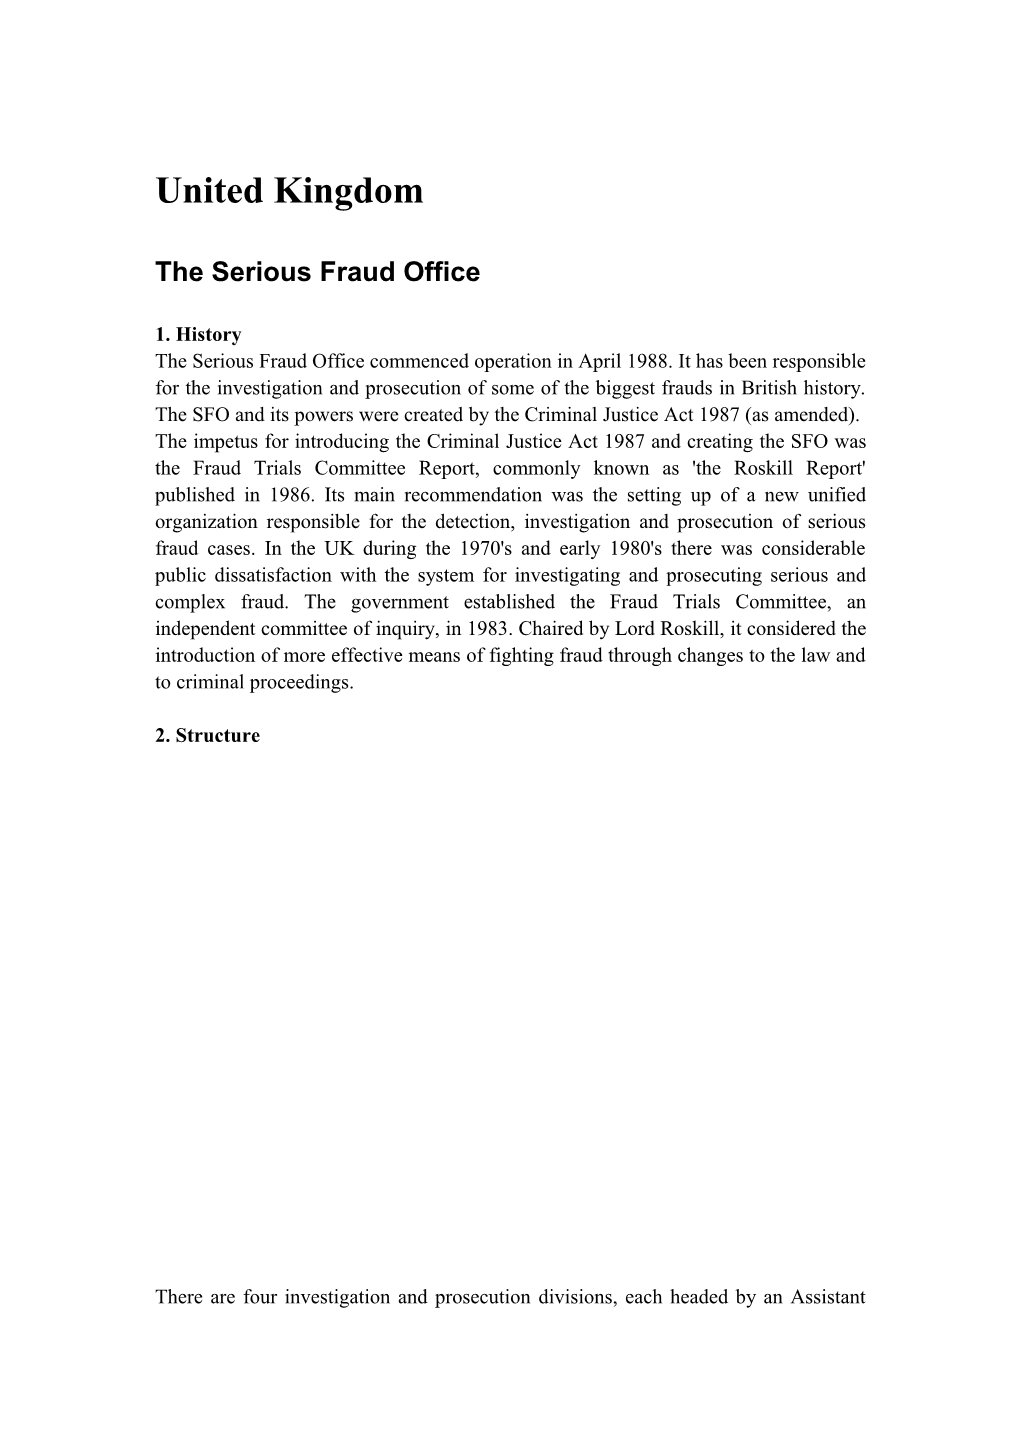 The Serious Fraud Office